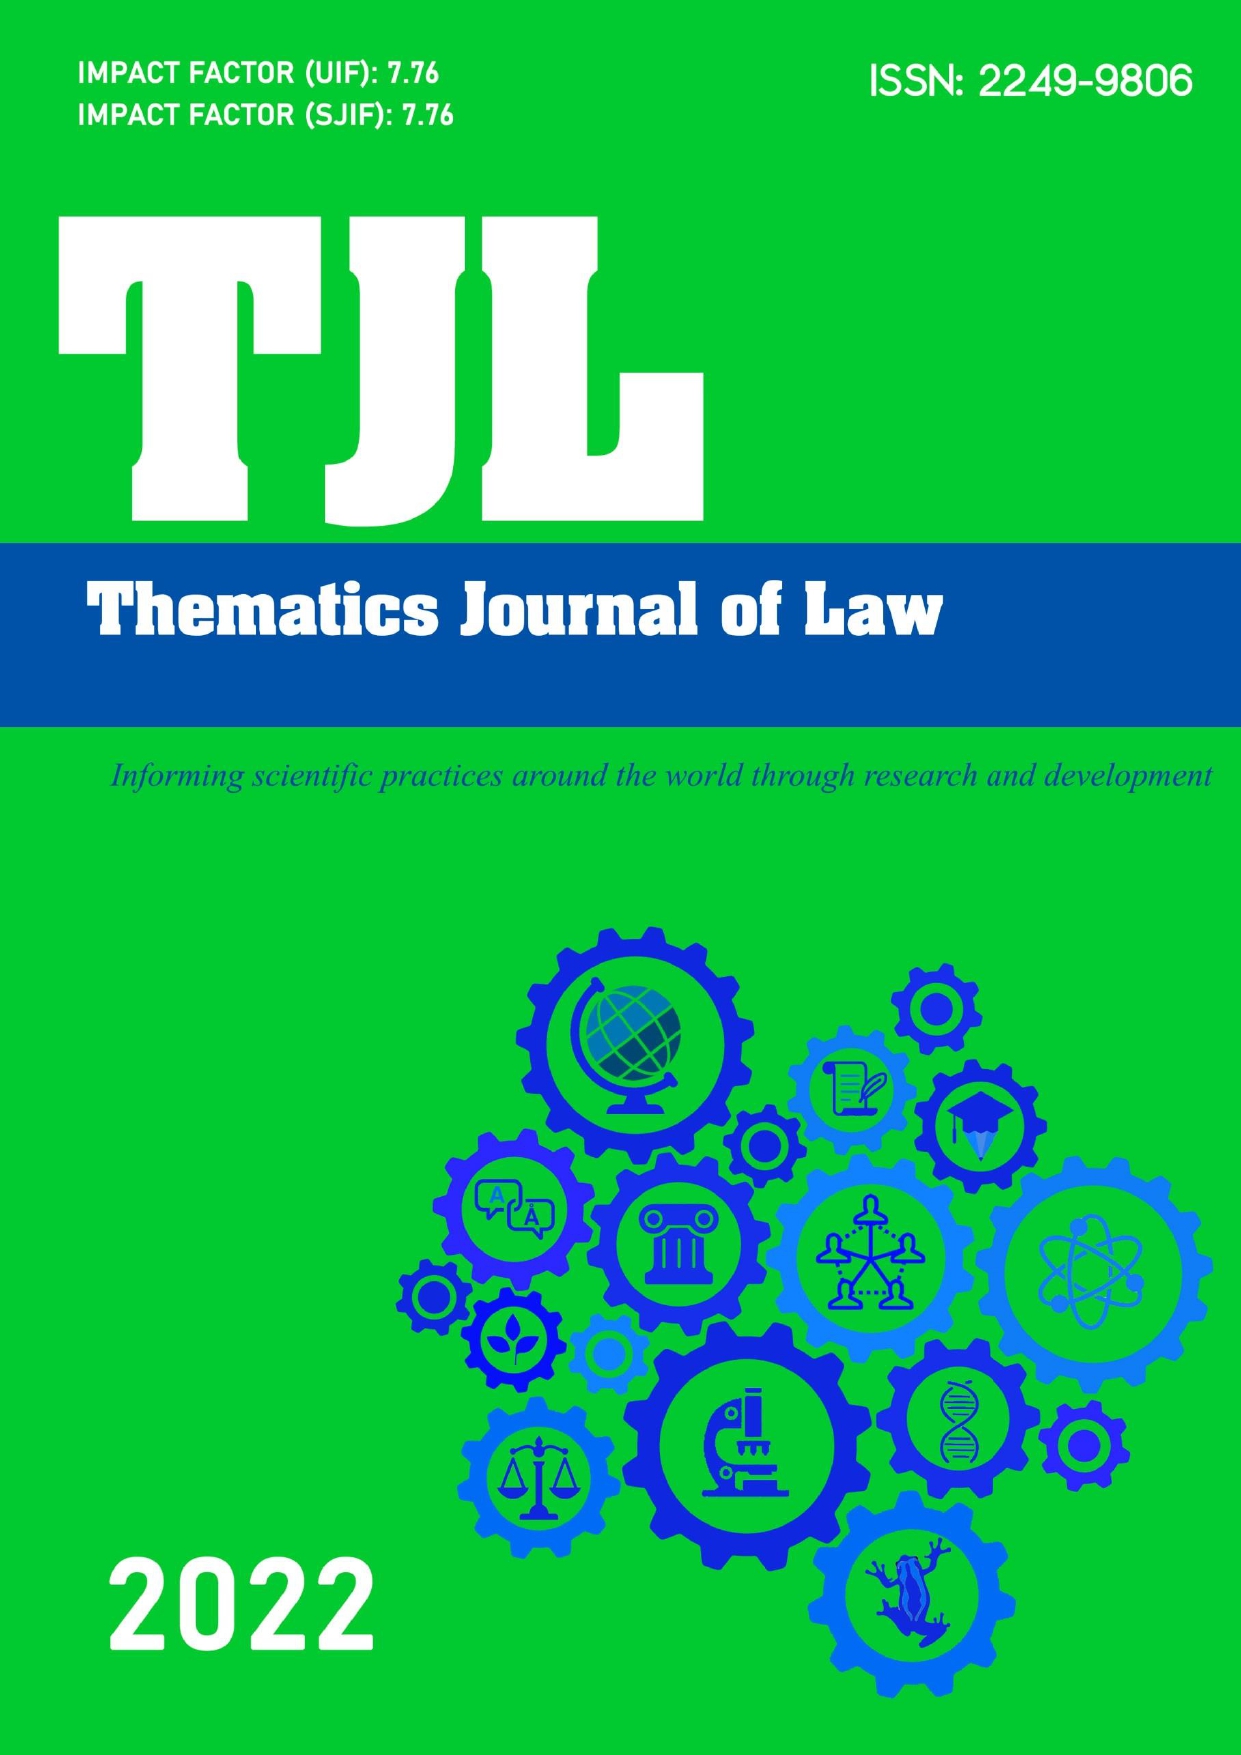 					View Vol. 6 No. 1 (2022): Thematics Journal of Law
				